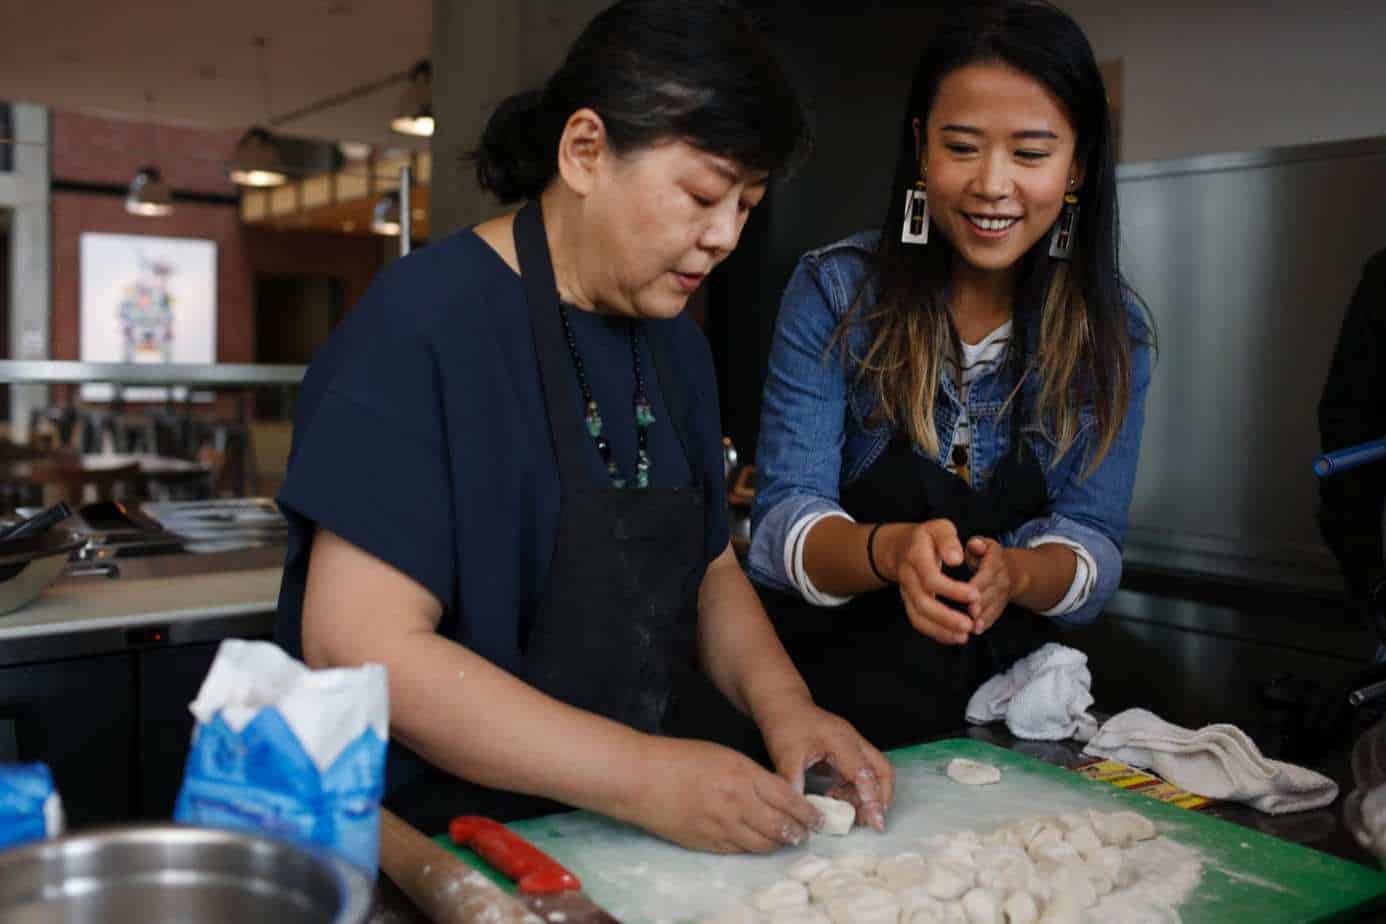 Short film "BAO" Director Domee Shi with her mother Ningsha Zhong shows the production team how to make dumplings, as seen on September 7, 2017 at Pixar Animation Studios in Emeryville, Calif.